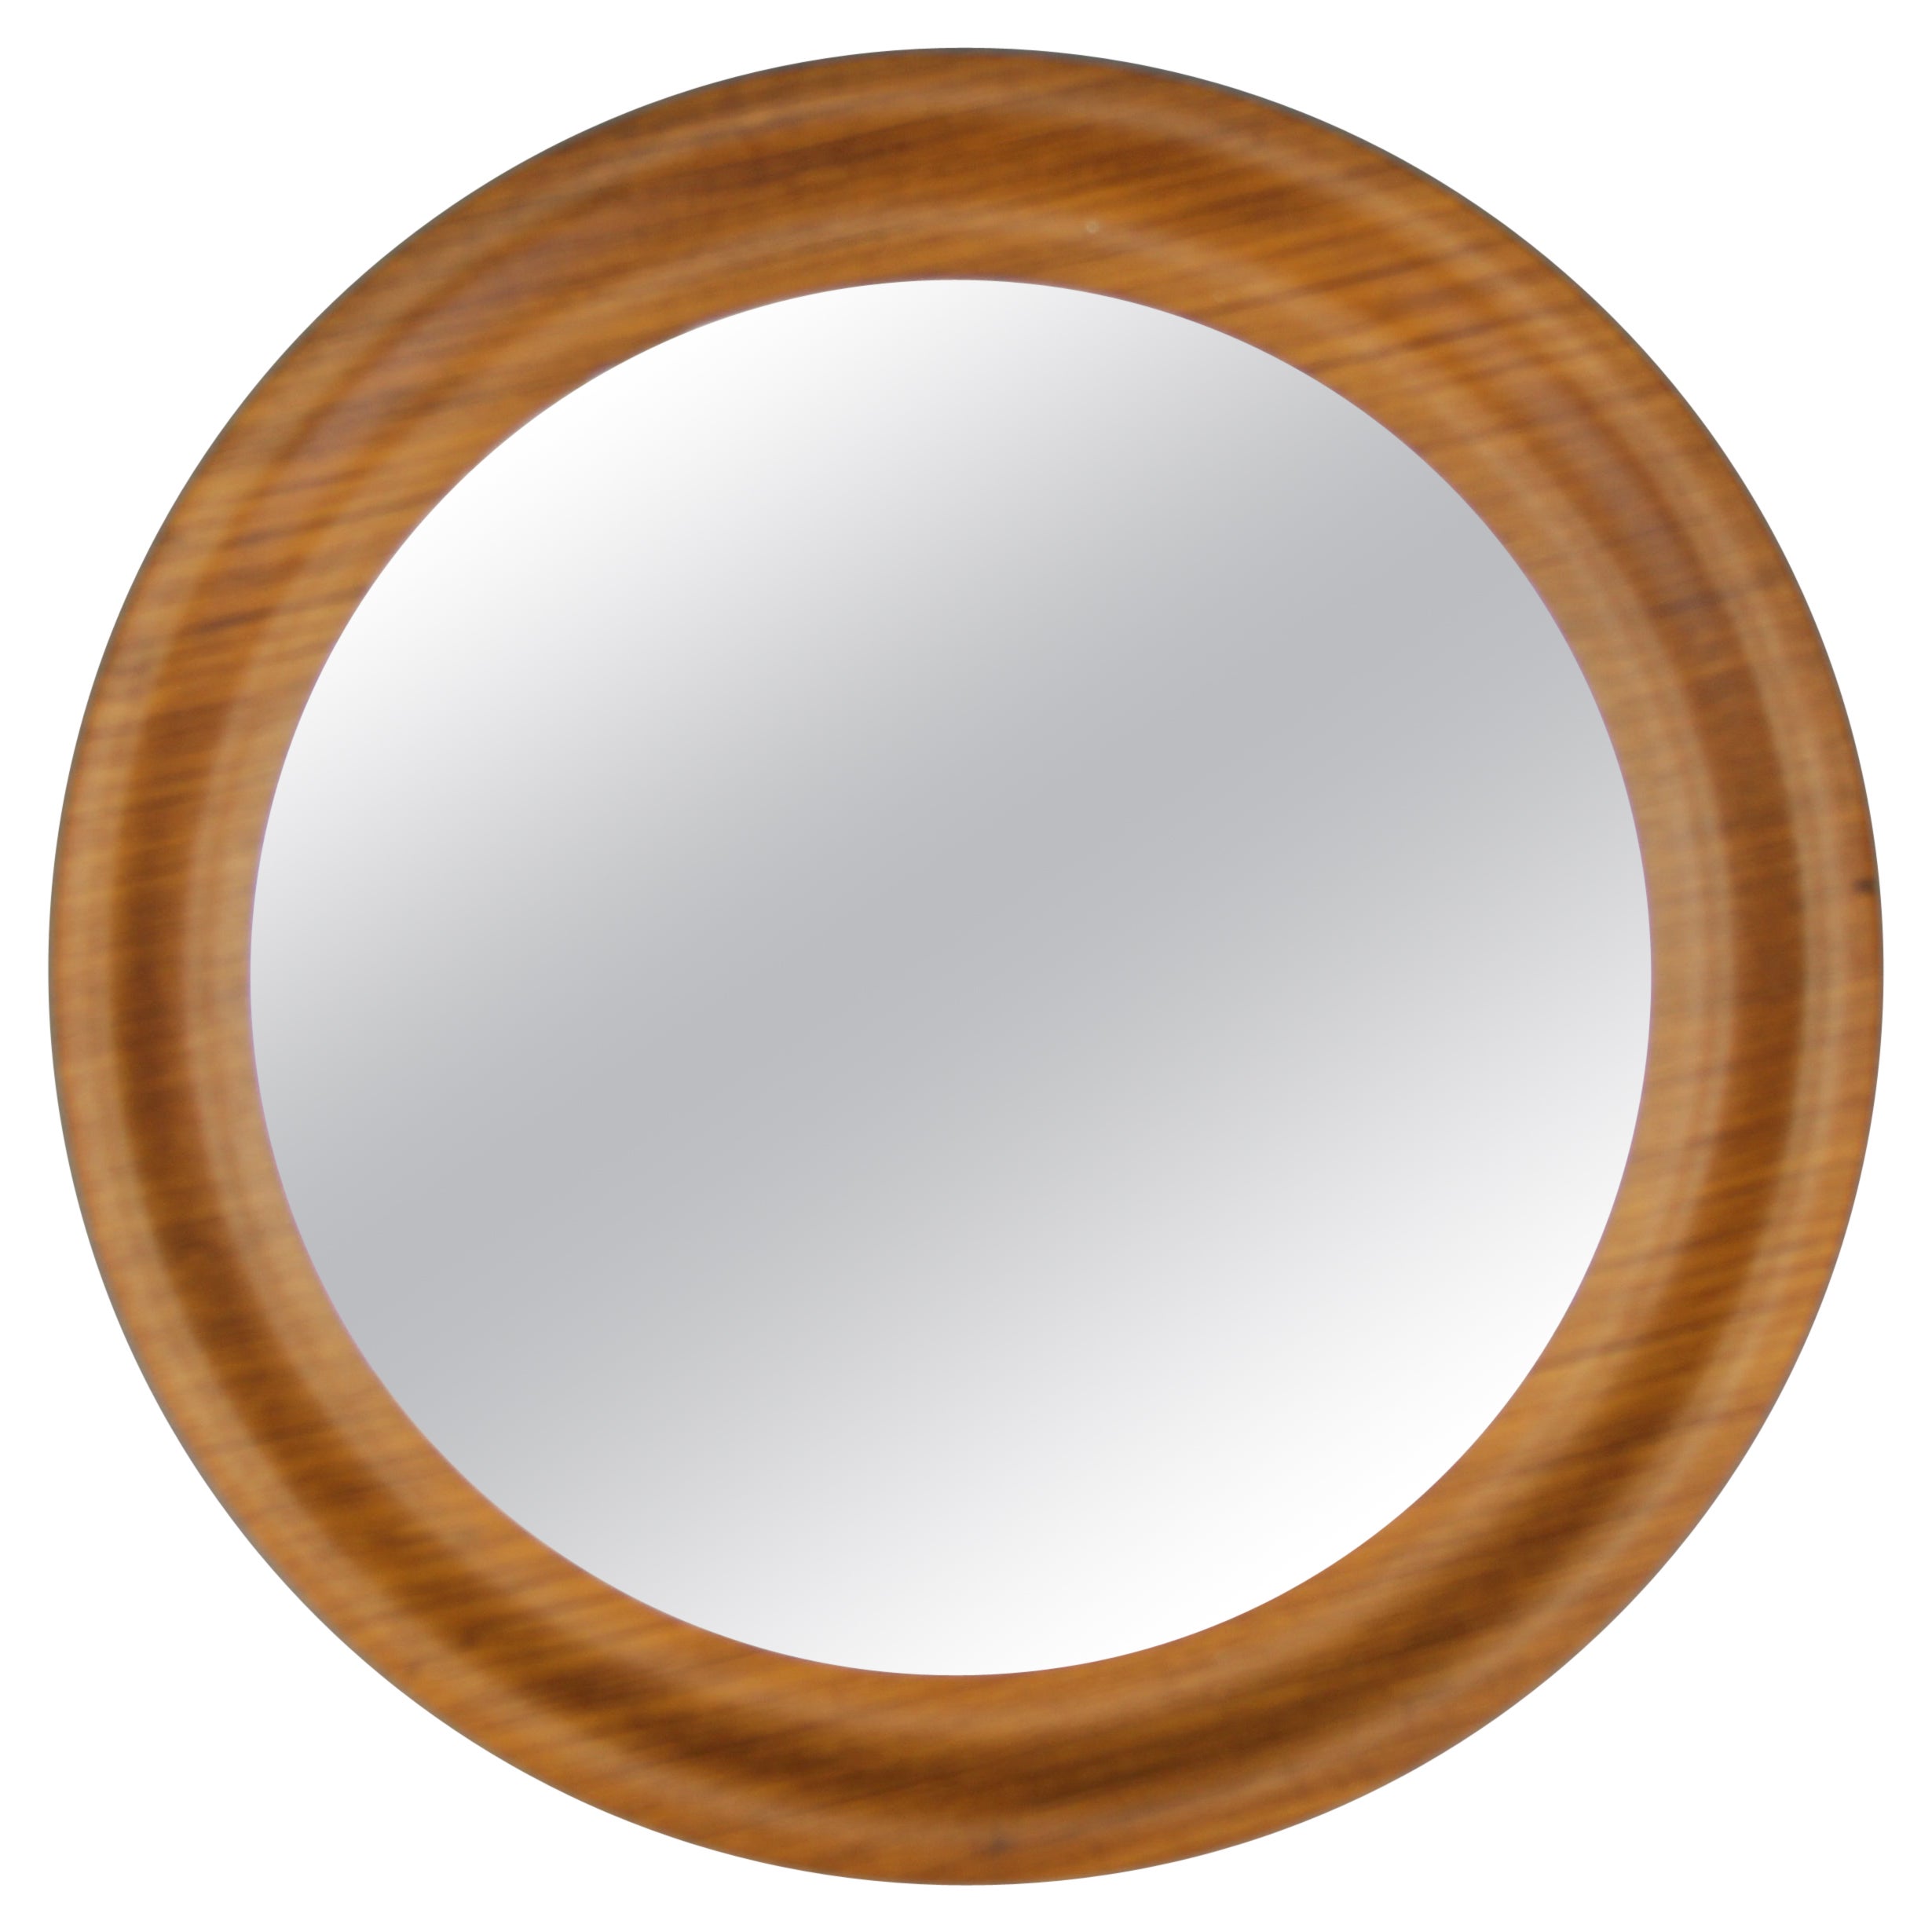 Mid-Century Modern Round Plywood Frame Wall Mirror, 1960s For Sale